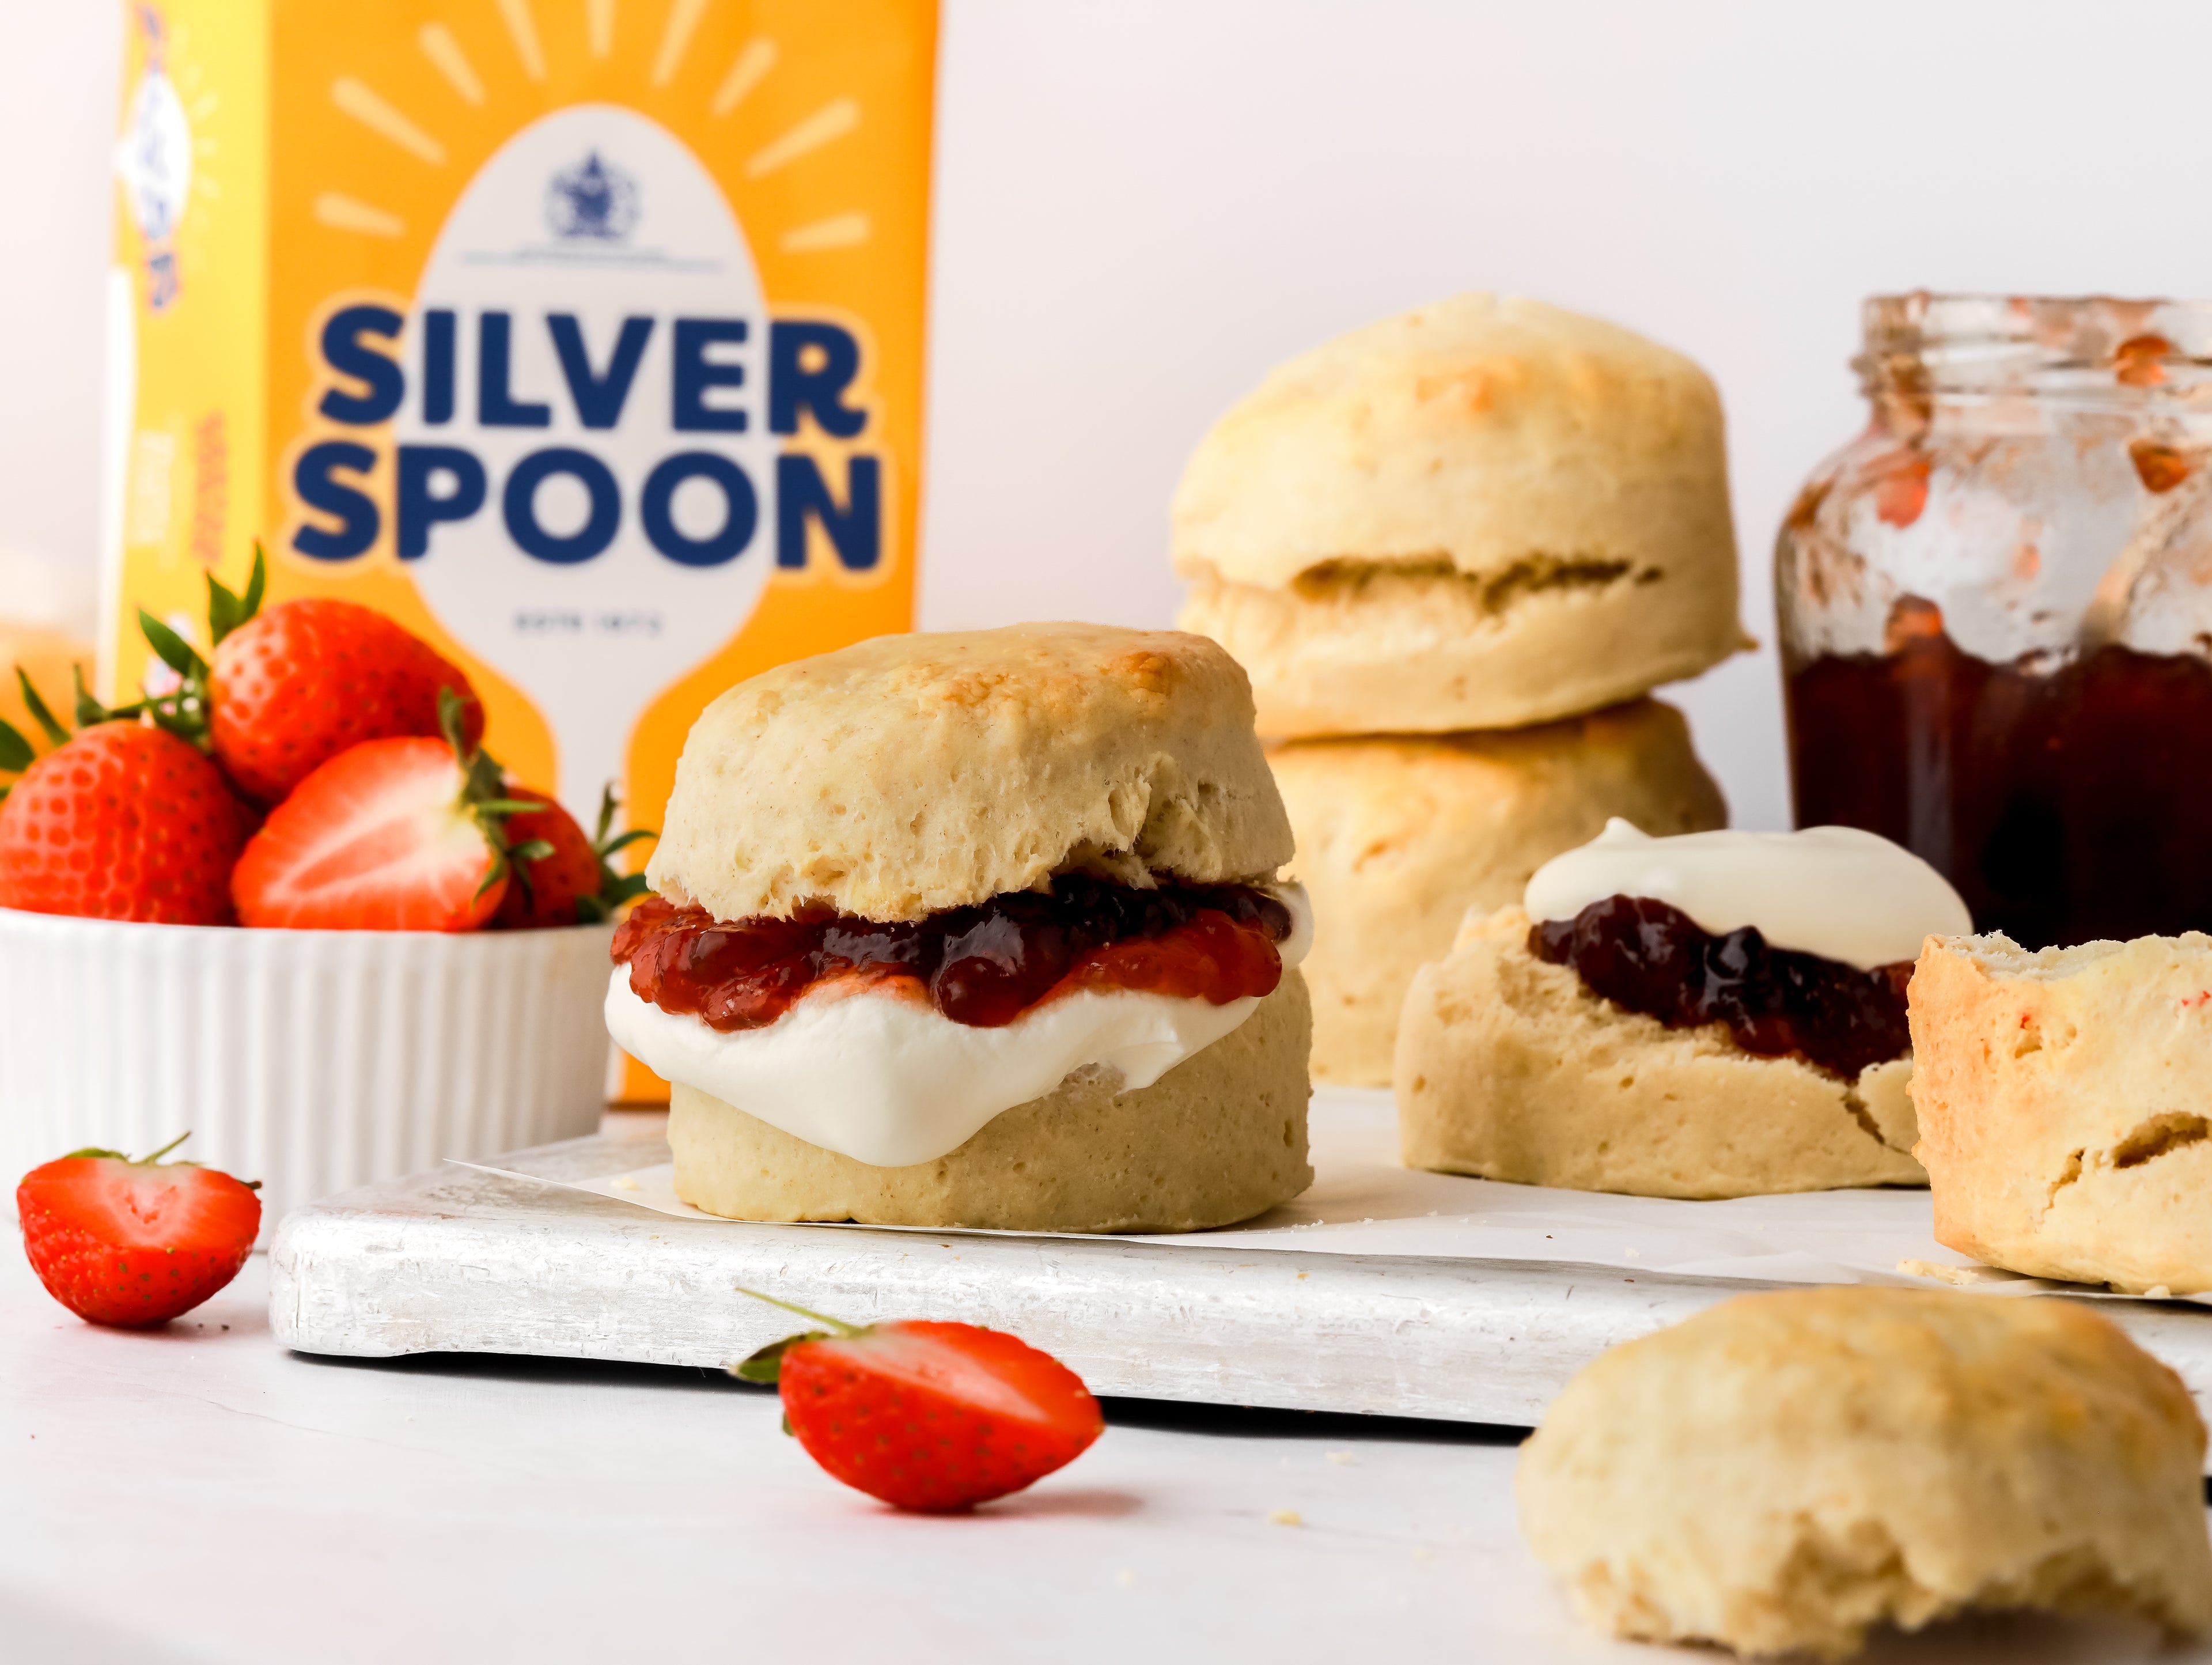 Scone filled with jam and cream and surrounded by a jam jar and strawberries